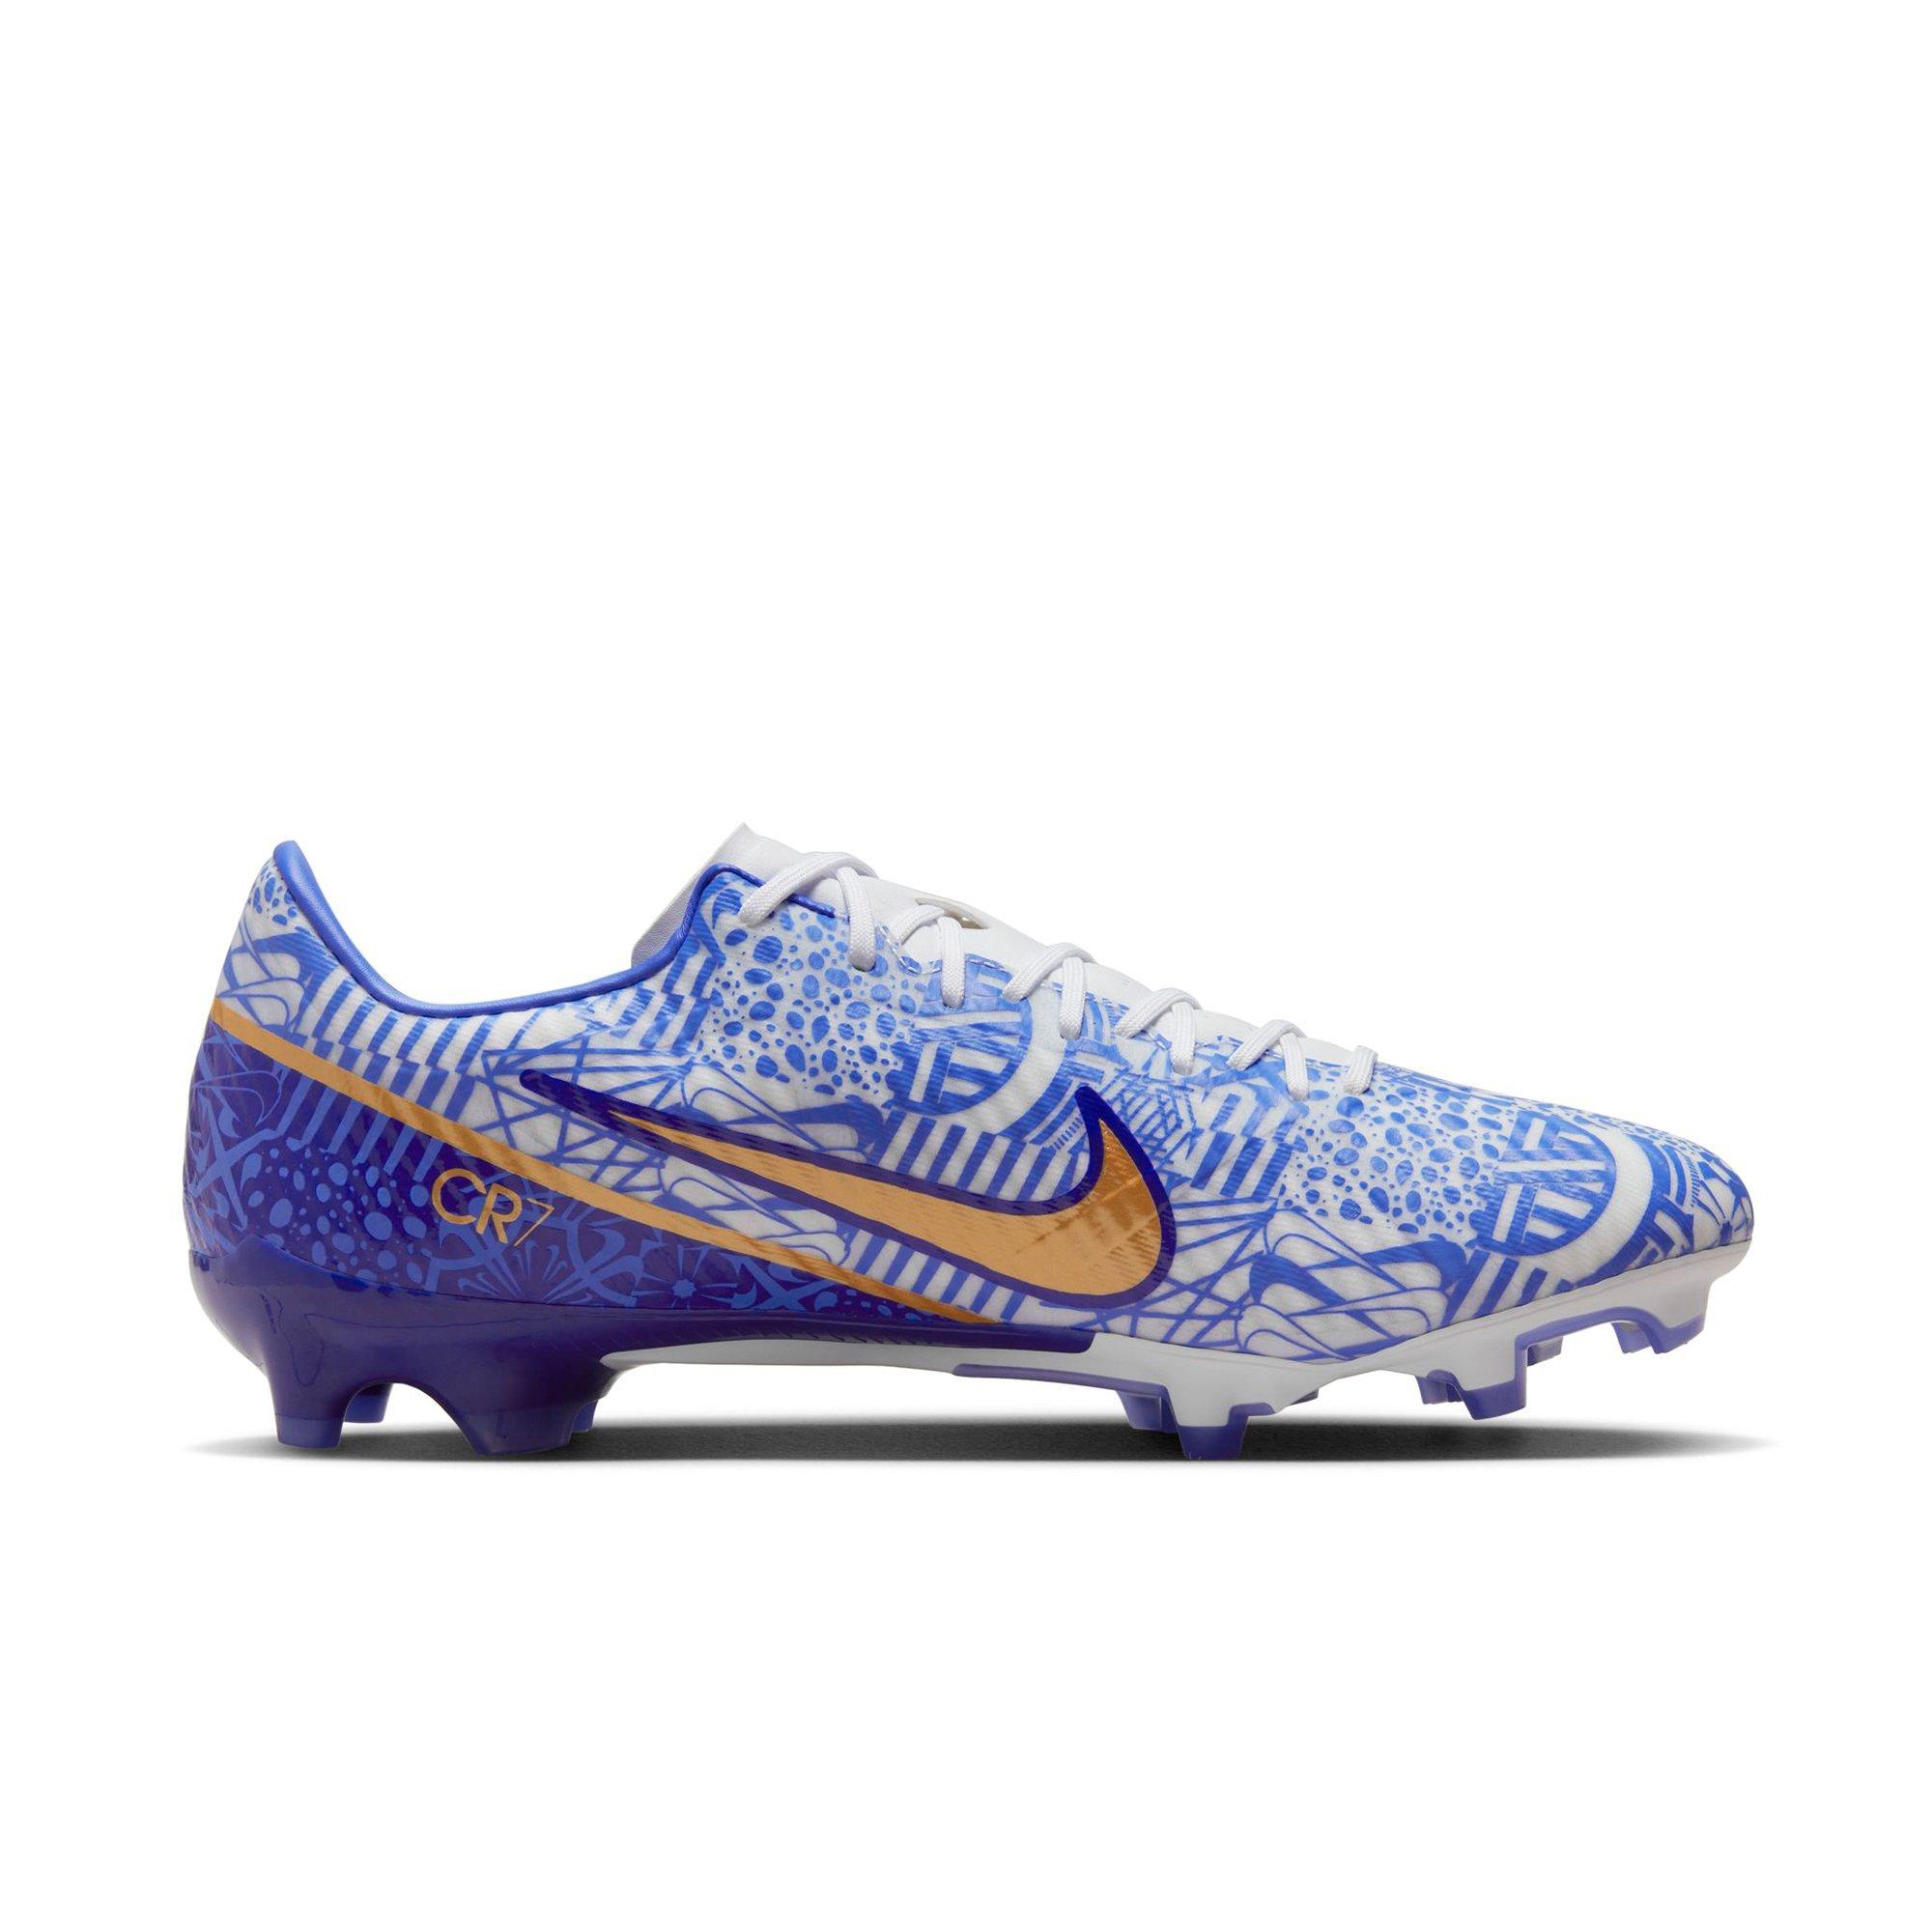 Football boots, Mens sports shoes, Sports & leisure, Nike